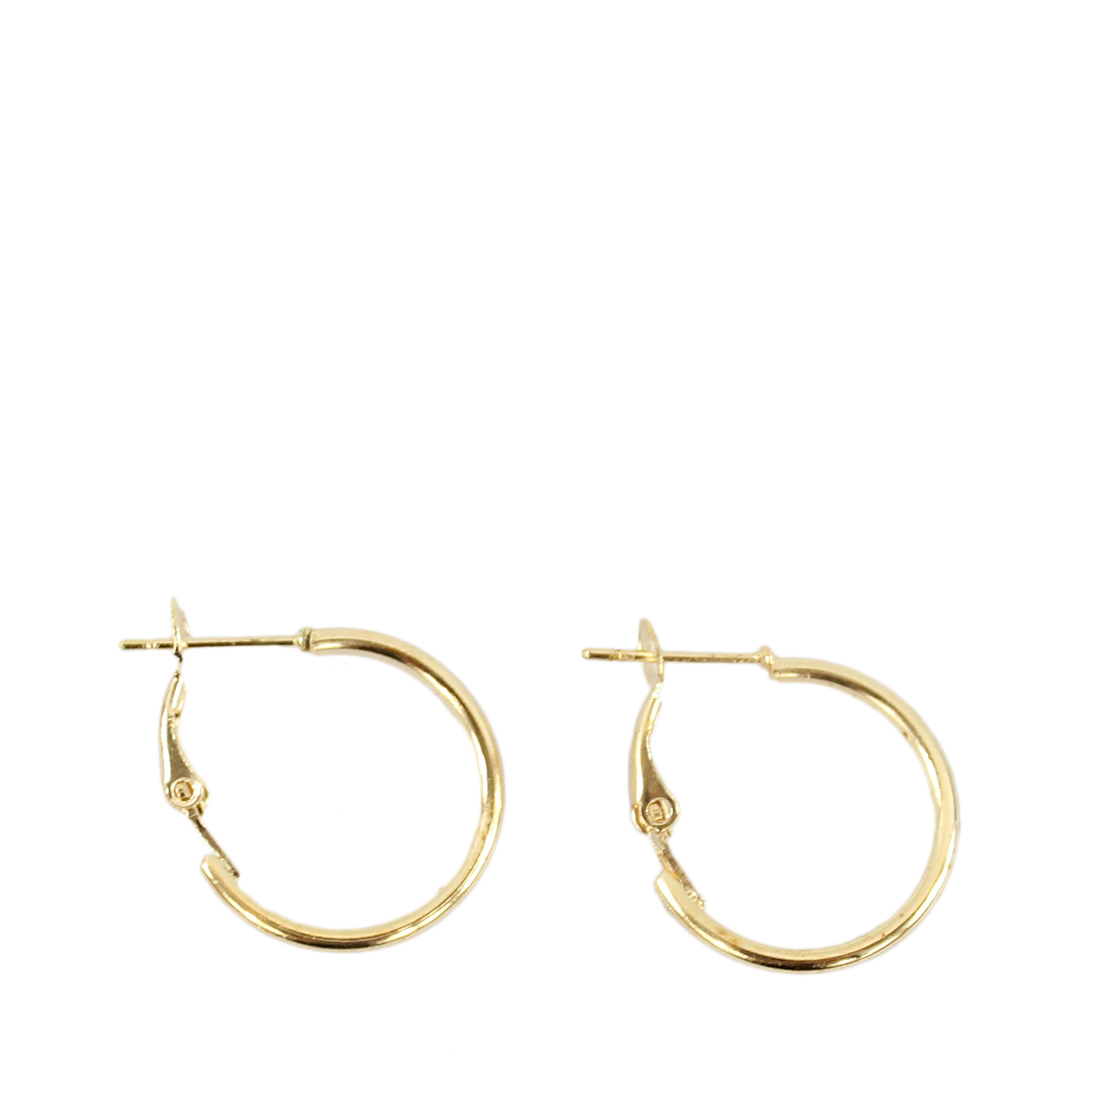 XSmall size hoops